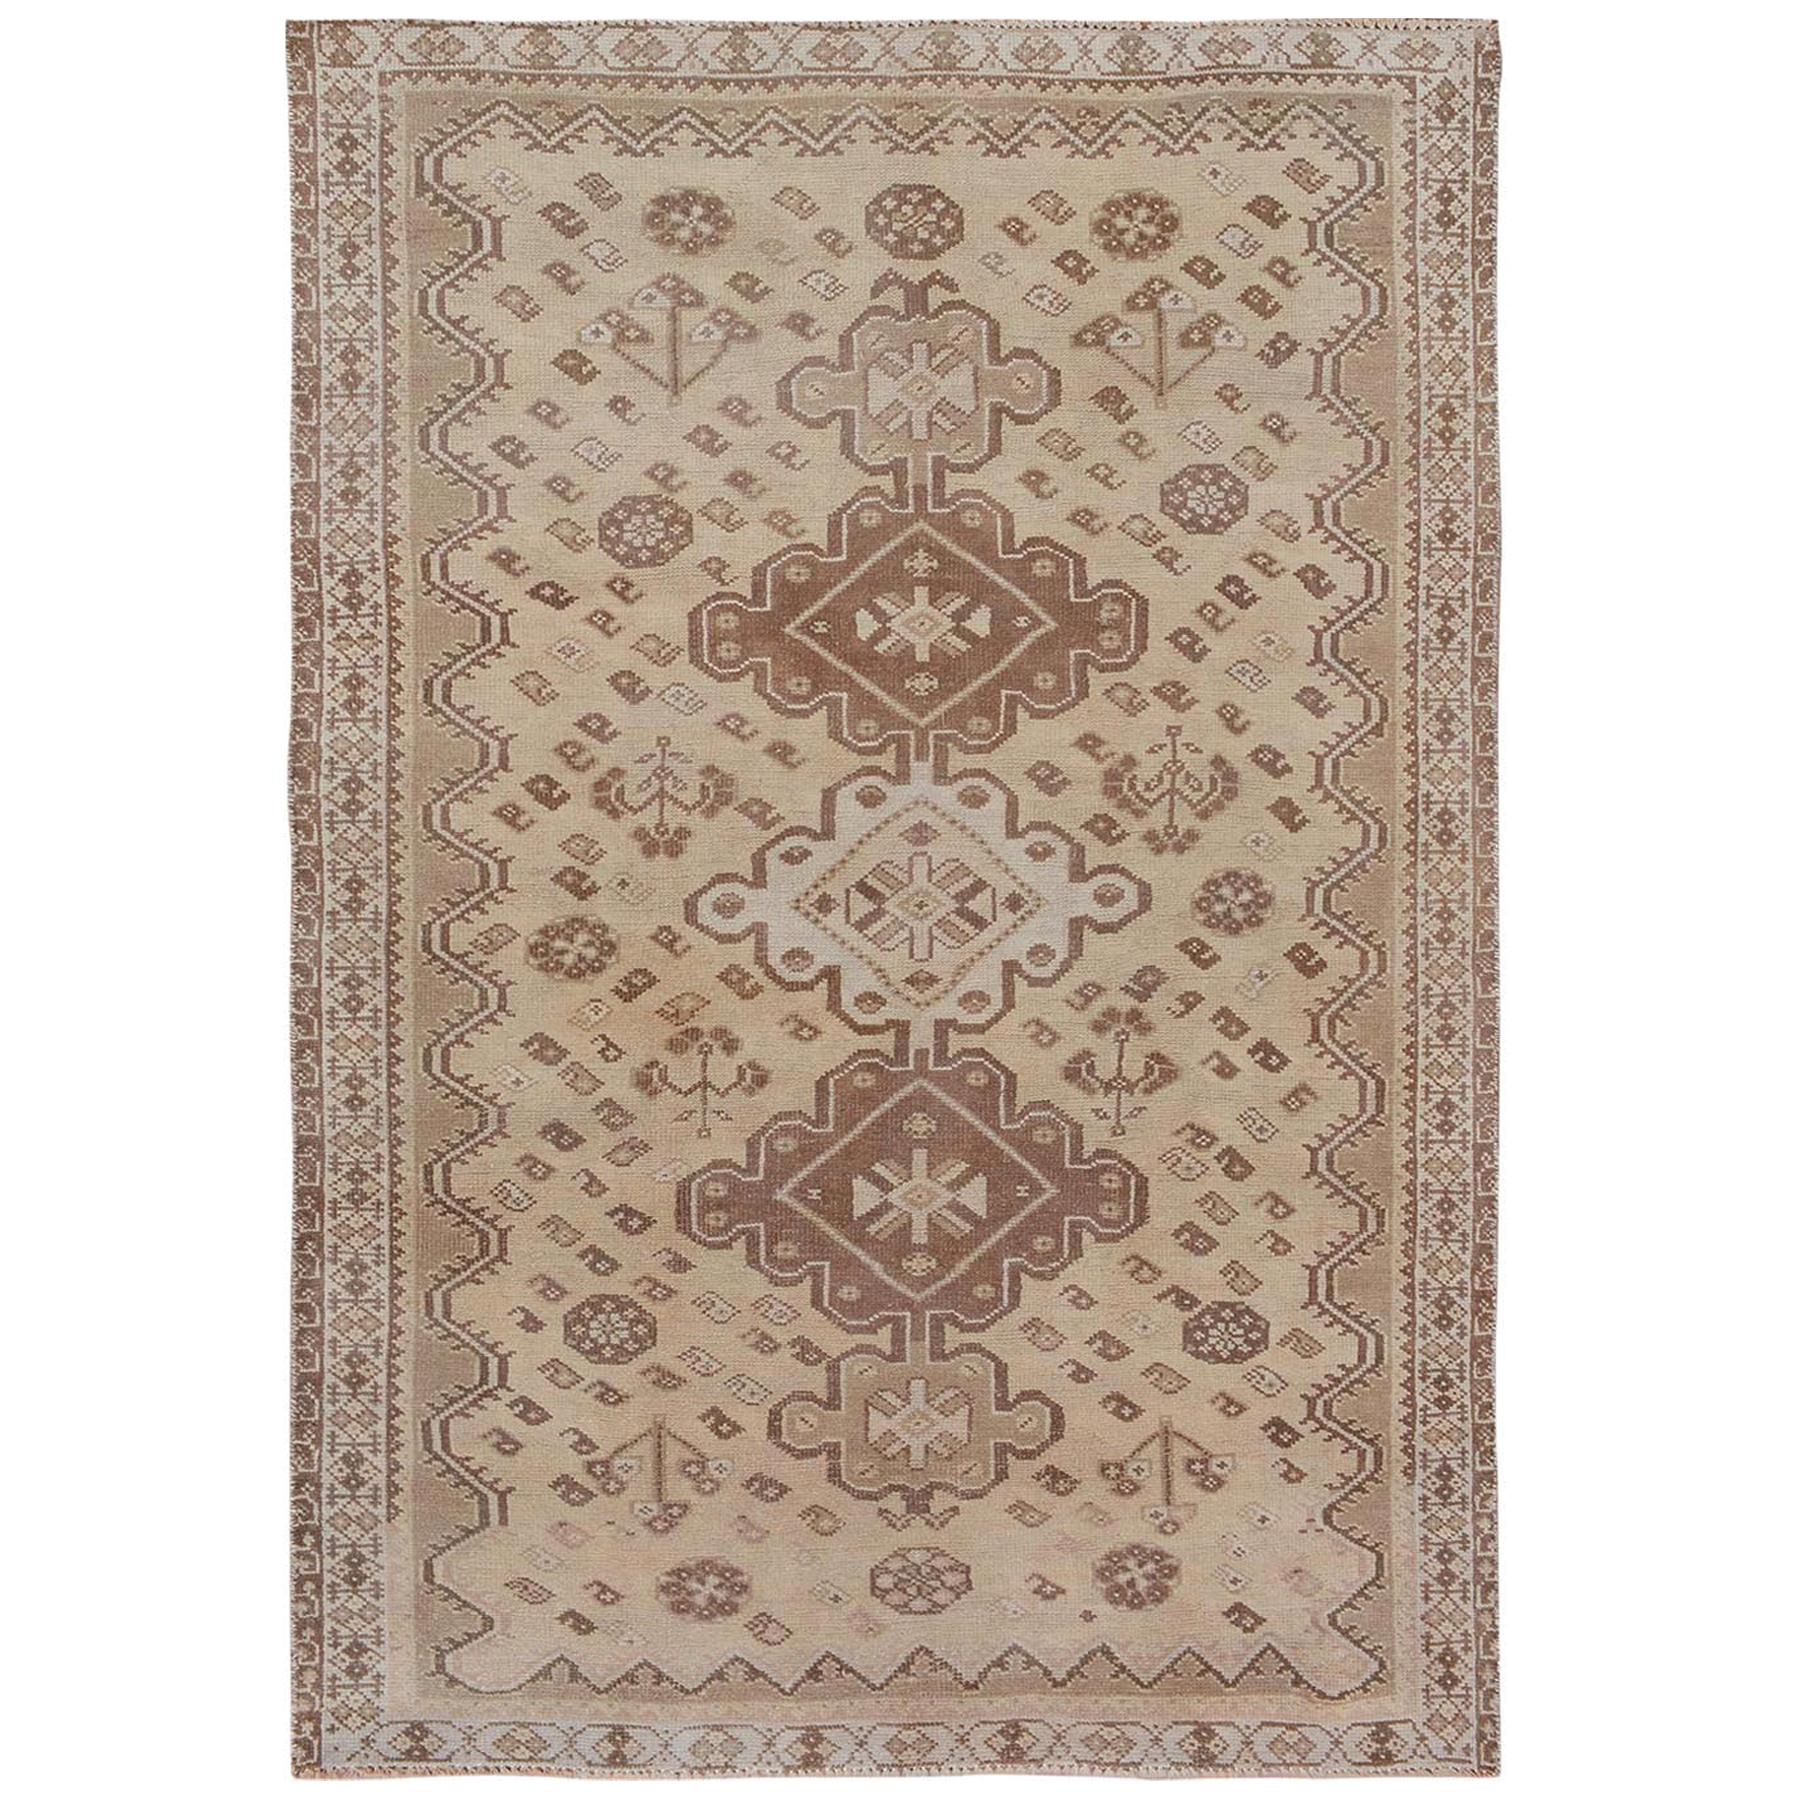 Earth Tones Vintage and Worn Down Persian Shiraz Clean Pure Wool Handknotted Rug For Sale